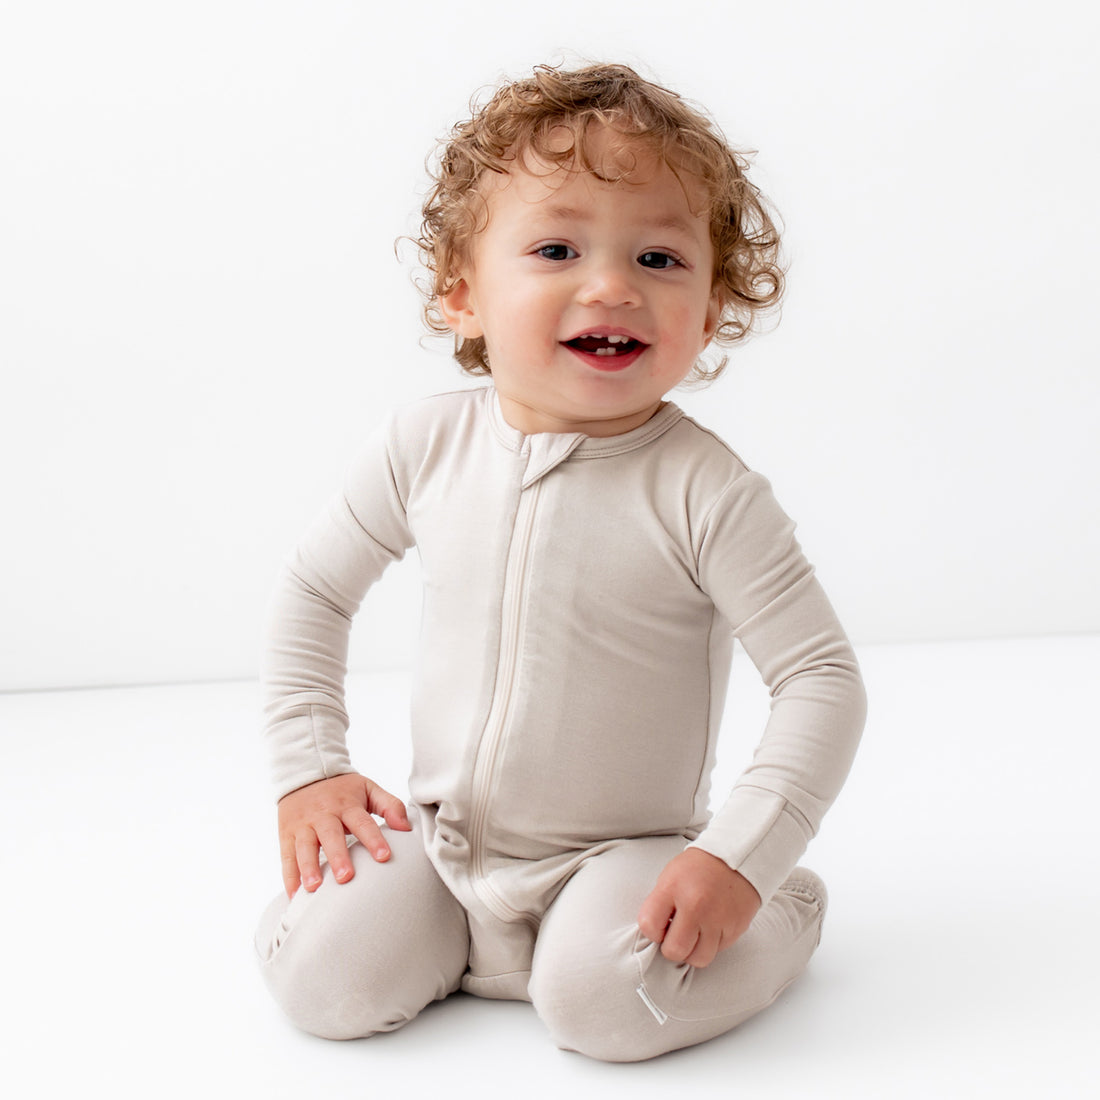 Bamboo vs. Cotton: Which is Better for Your Baby and the Planet?